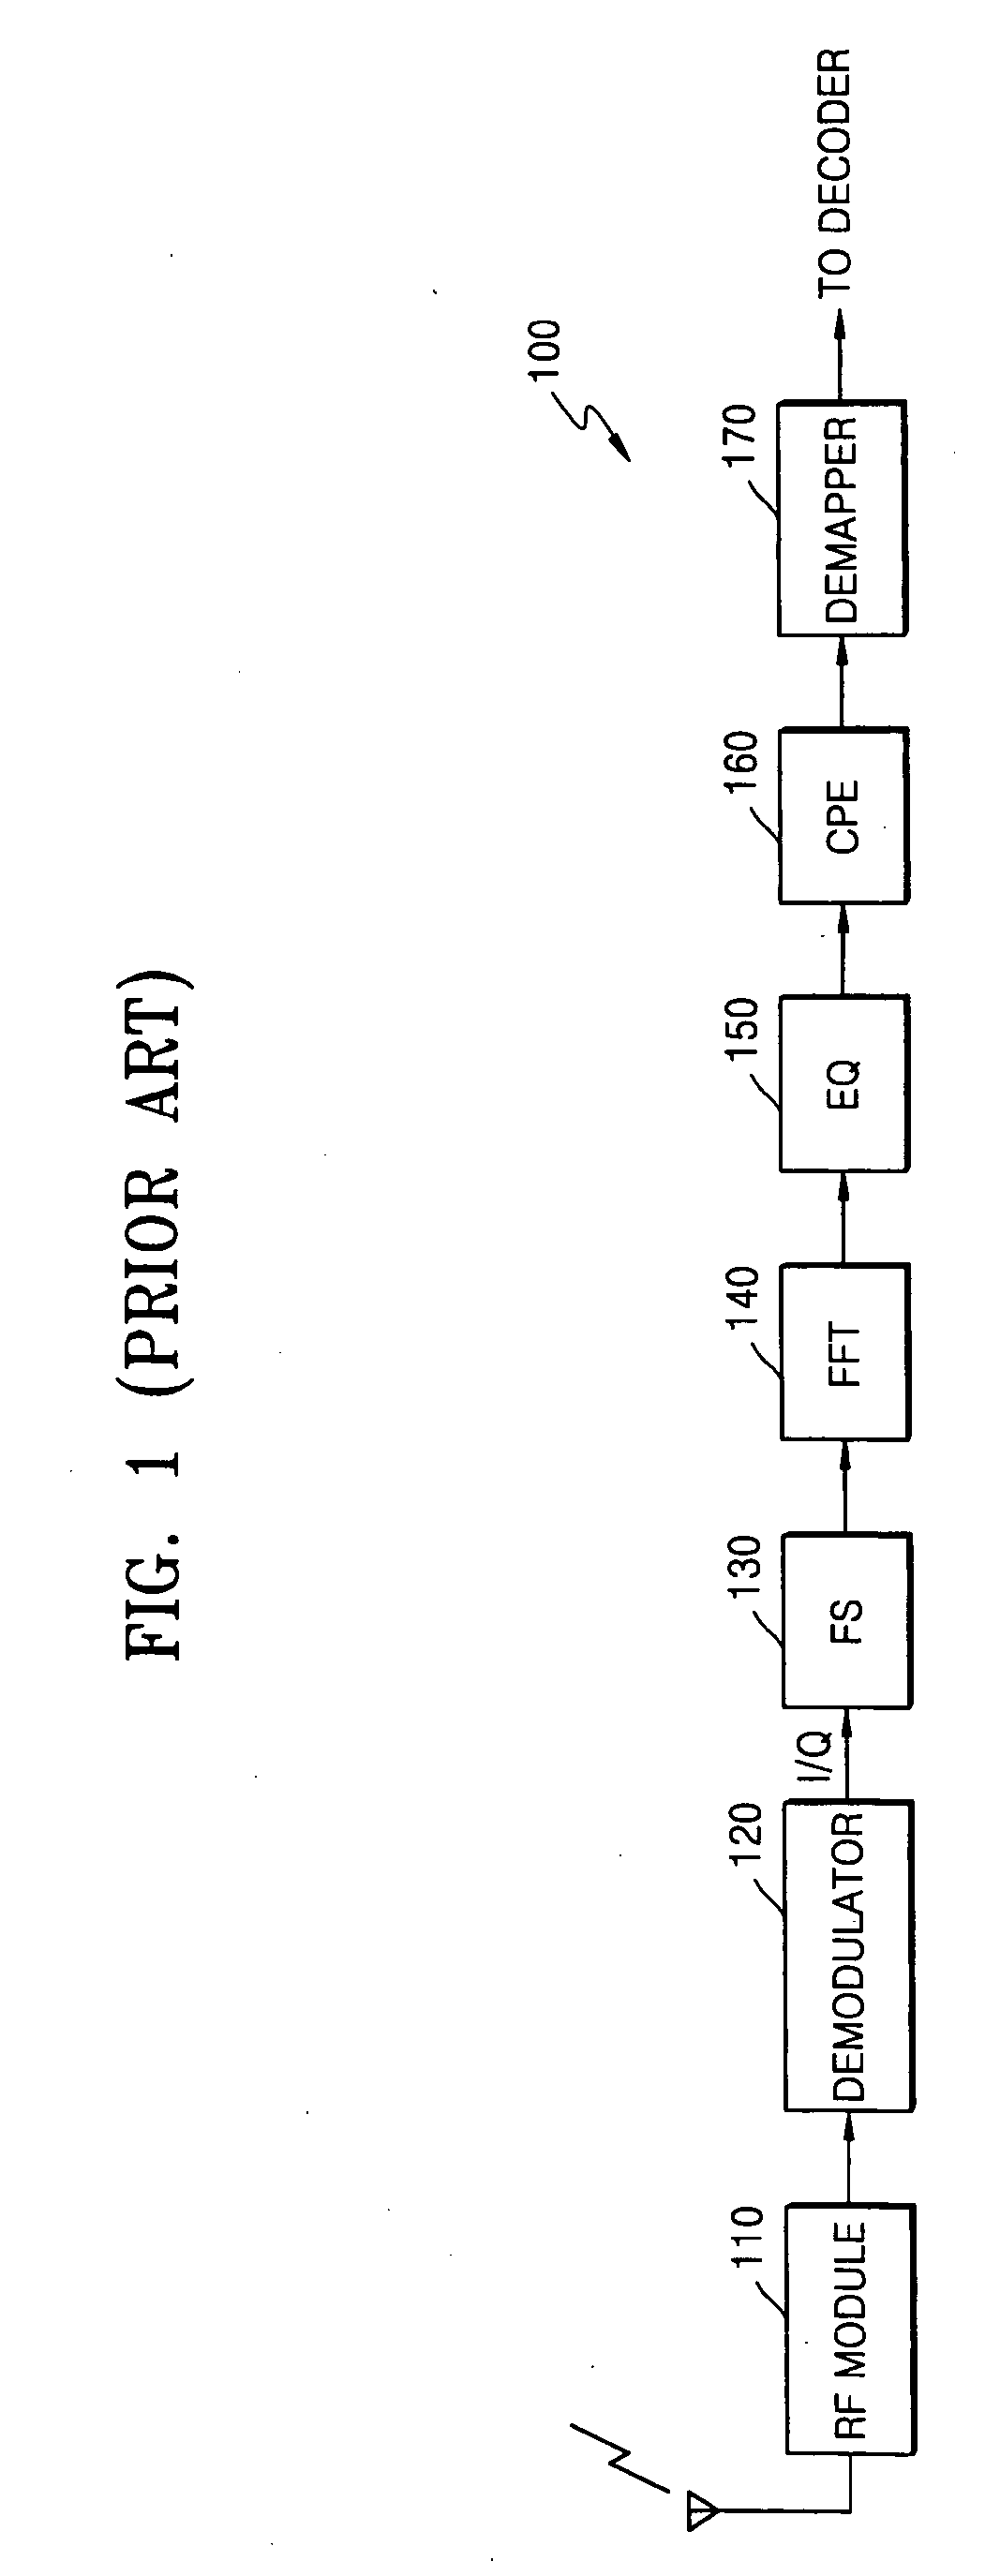 OFDM signal receiving apparatus and method for estimating common phase error of OFDM signals using data subcarriers